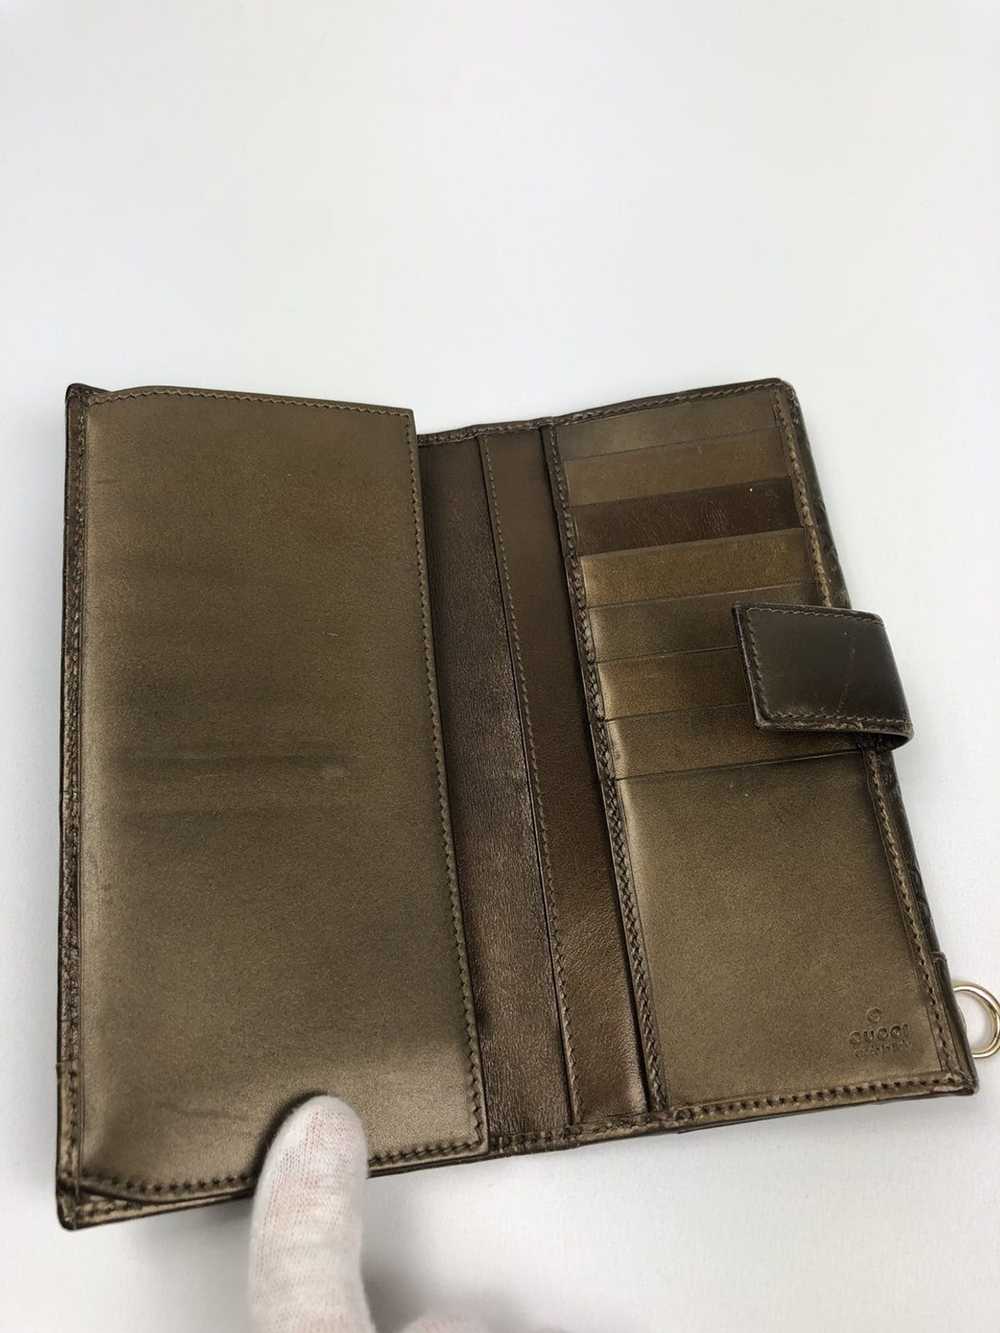 Gucci Gucci gg guccissima leather long wallet - image 3